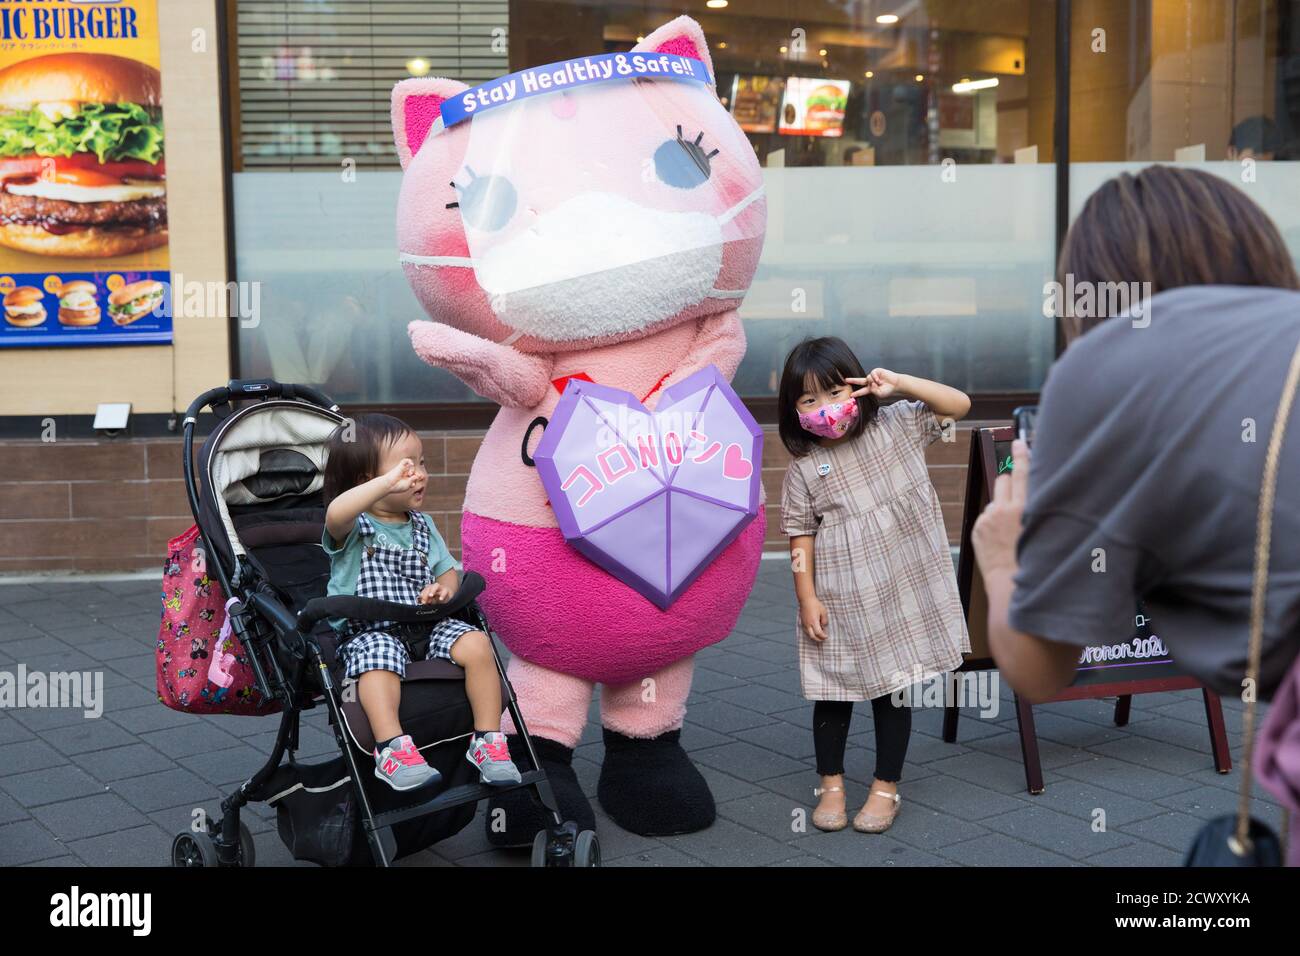 Koronon, a Japanese anti-coronavirus cat mascot poses with children for a photo in Ikebukuro, Tokyo.Koronon, a Japanese anti-coronavirus cat mascot who hands out disposable face masks and raises awareness about the coronavirus (Covid-19) waves at pedestrians in Ikebukuro, Tokyo. Koronon can also be booked to visit schools and companies to share its message about hygiene and other measures to fight Covid-19. Stock Photo